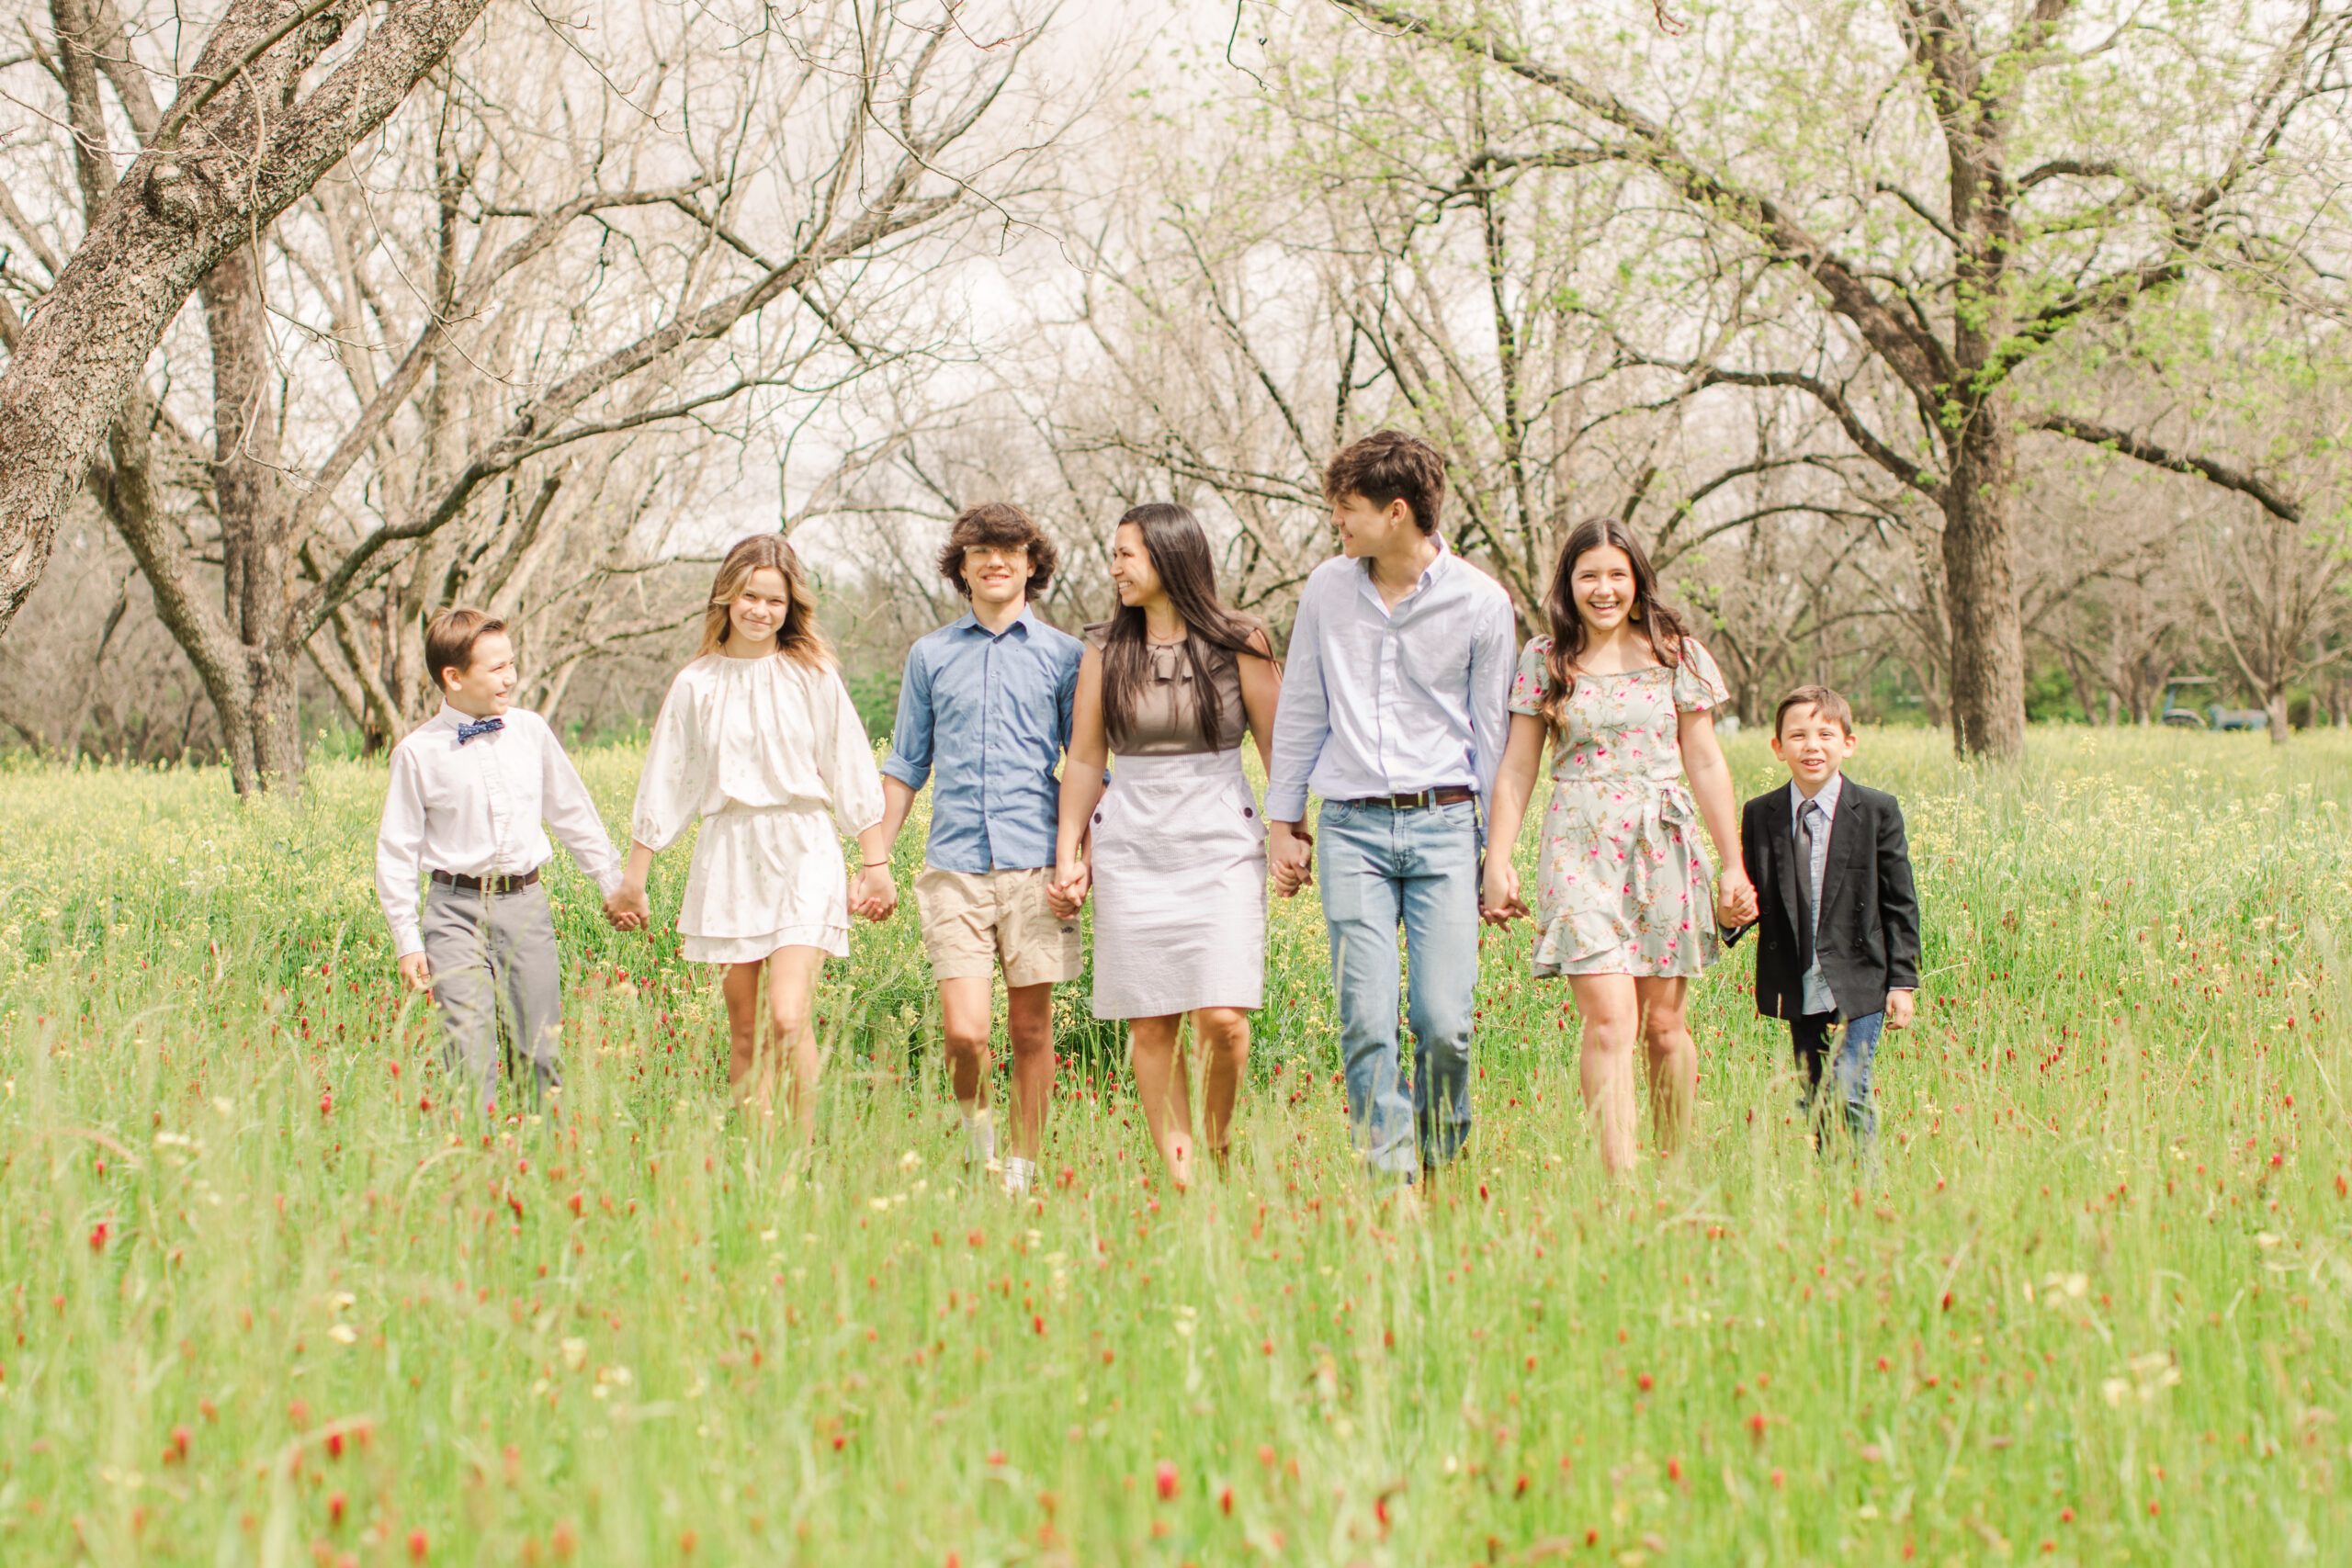 picking the perfect location for family photos involves thoughtful consideration of your family's personality, the season and weather, accessibility, and collaboration with your photographer